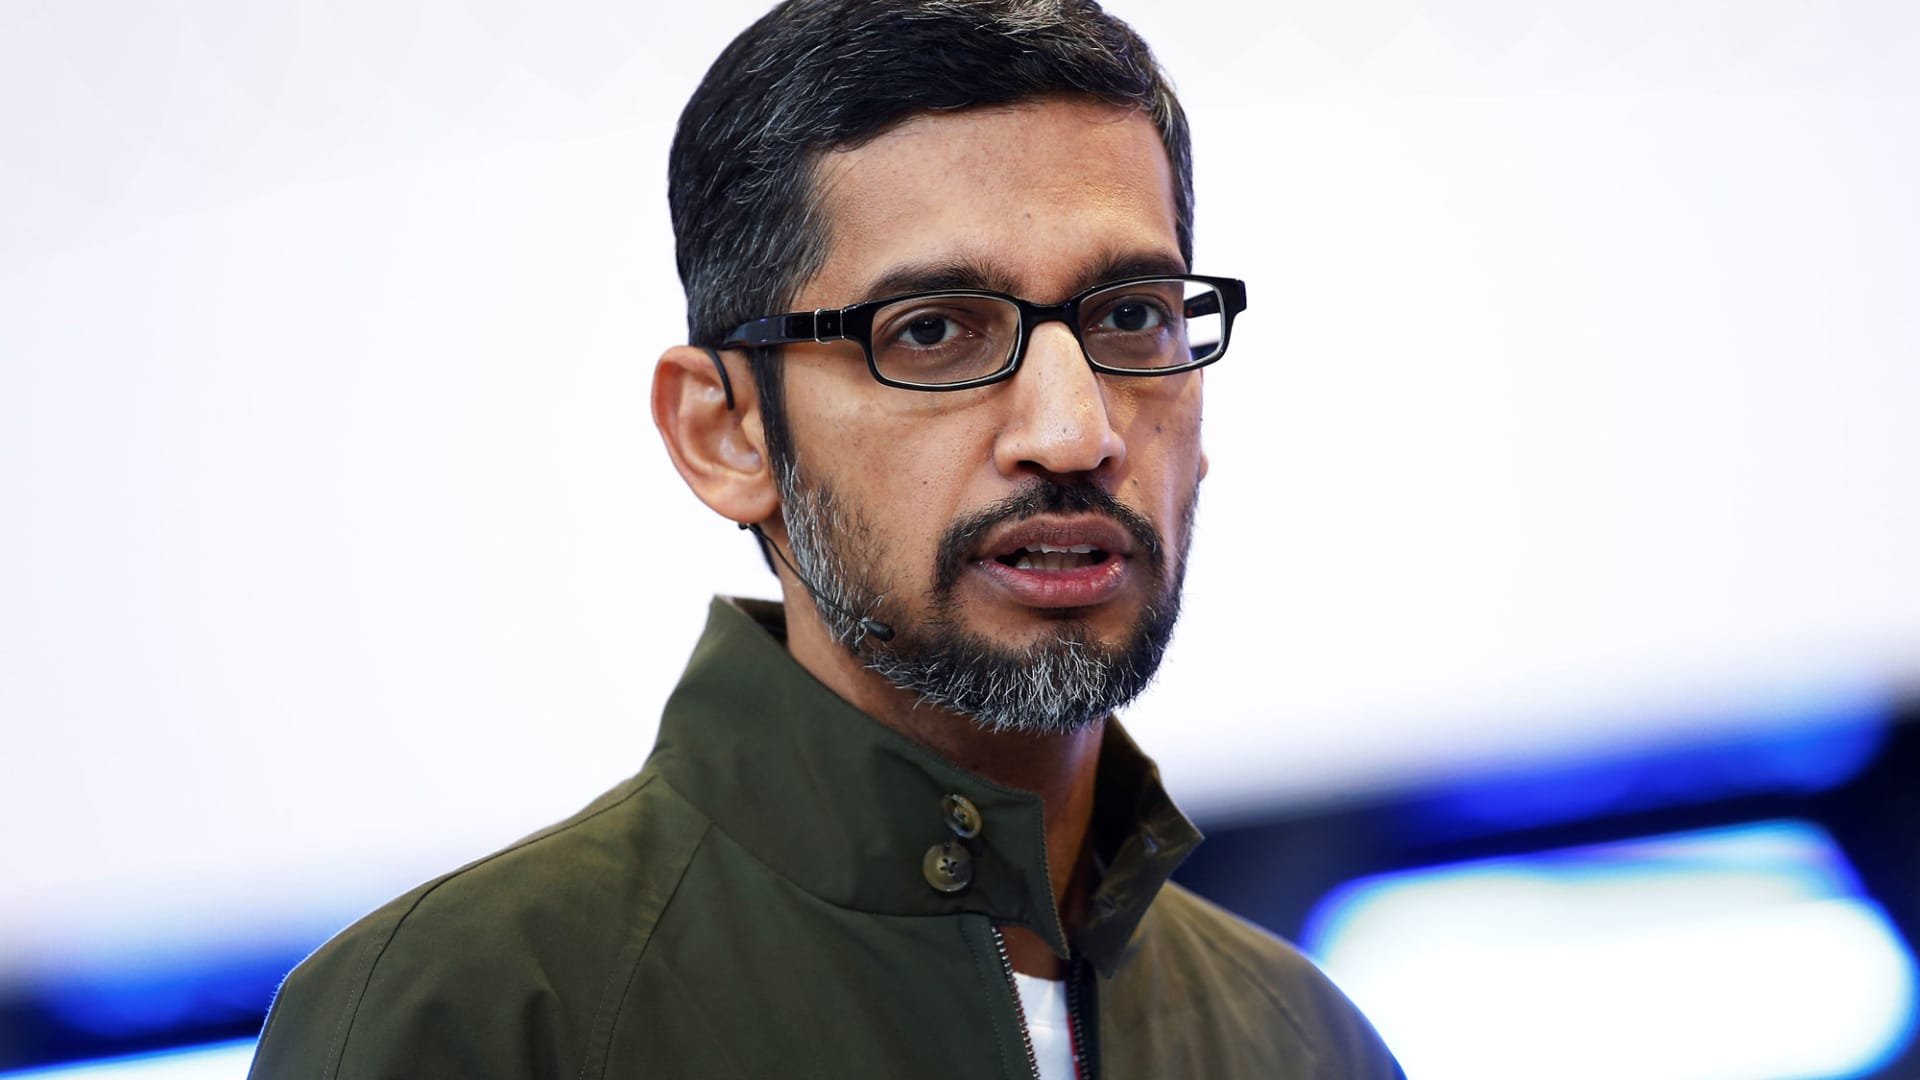 Google CEO sends consoling email to employees amid rise in anti-Asian hate crimes